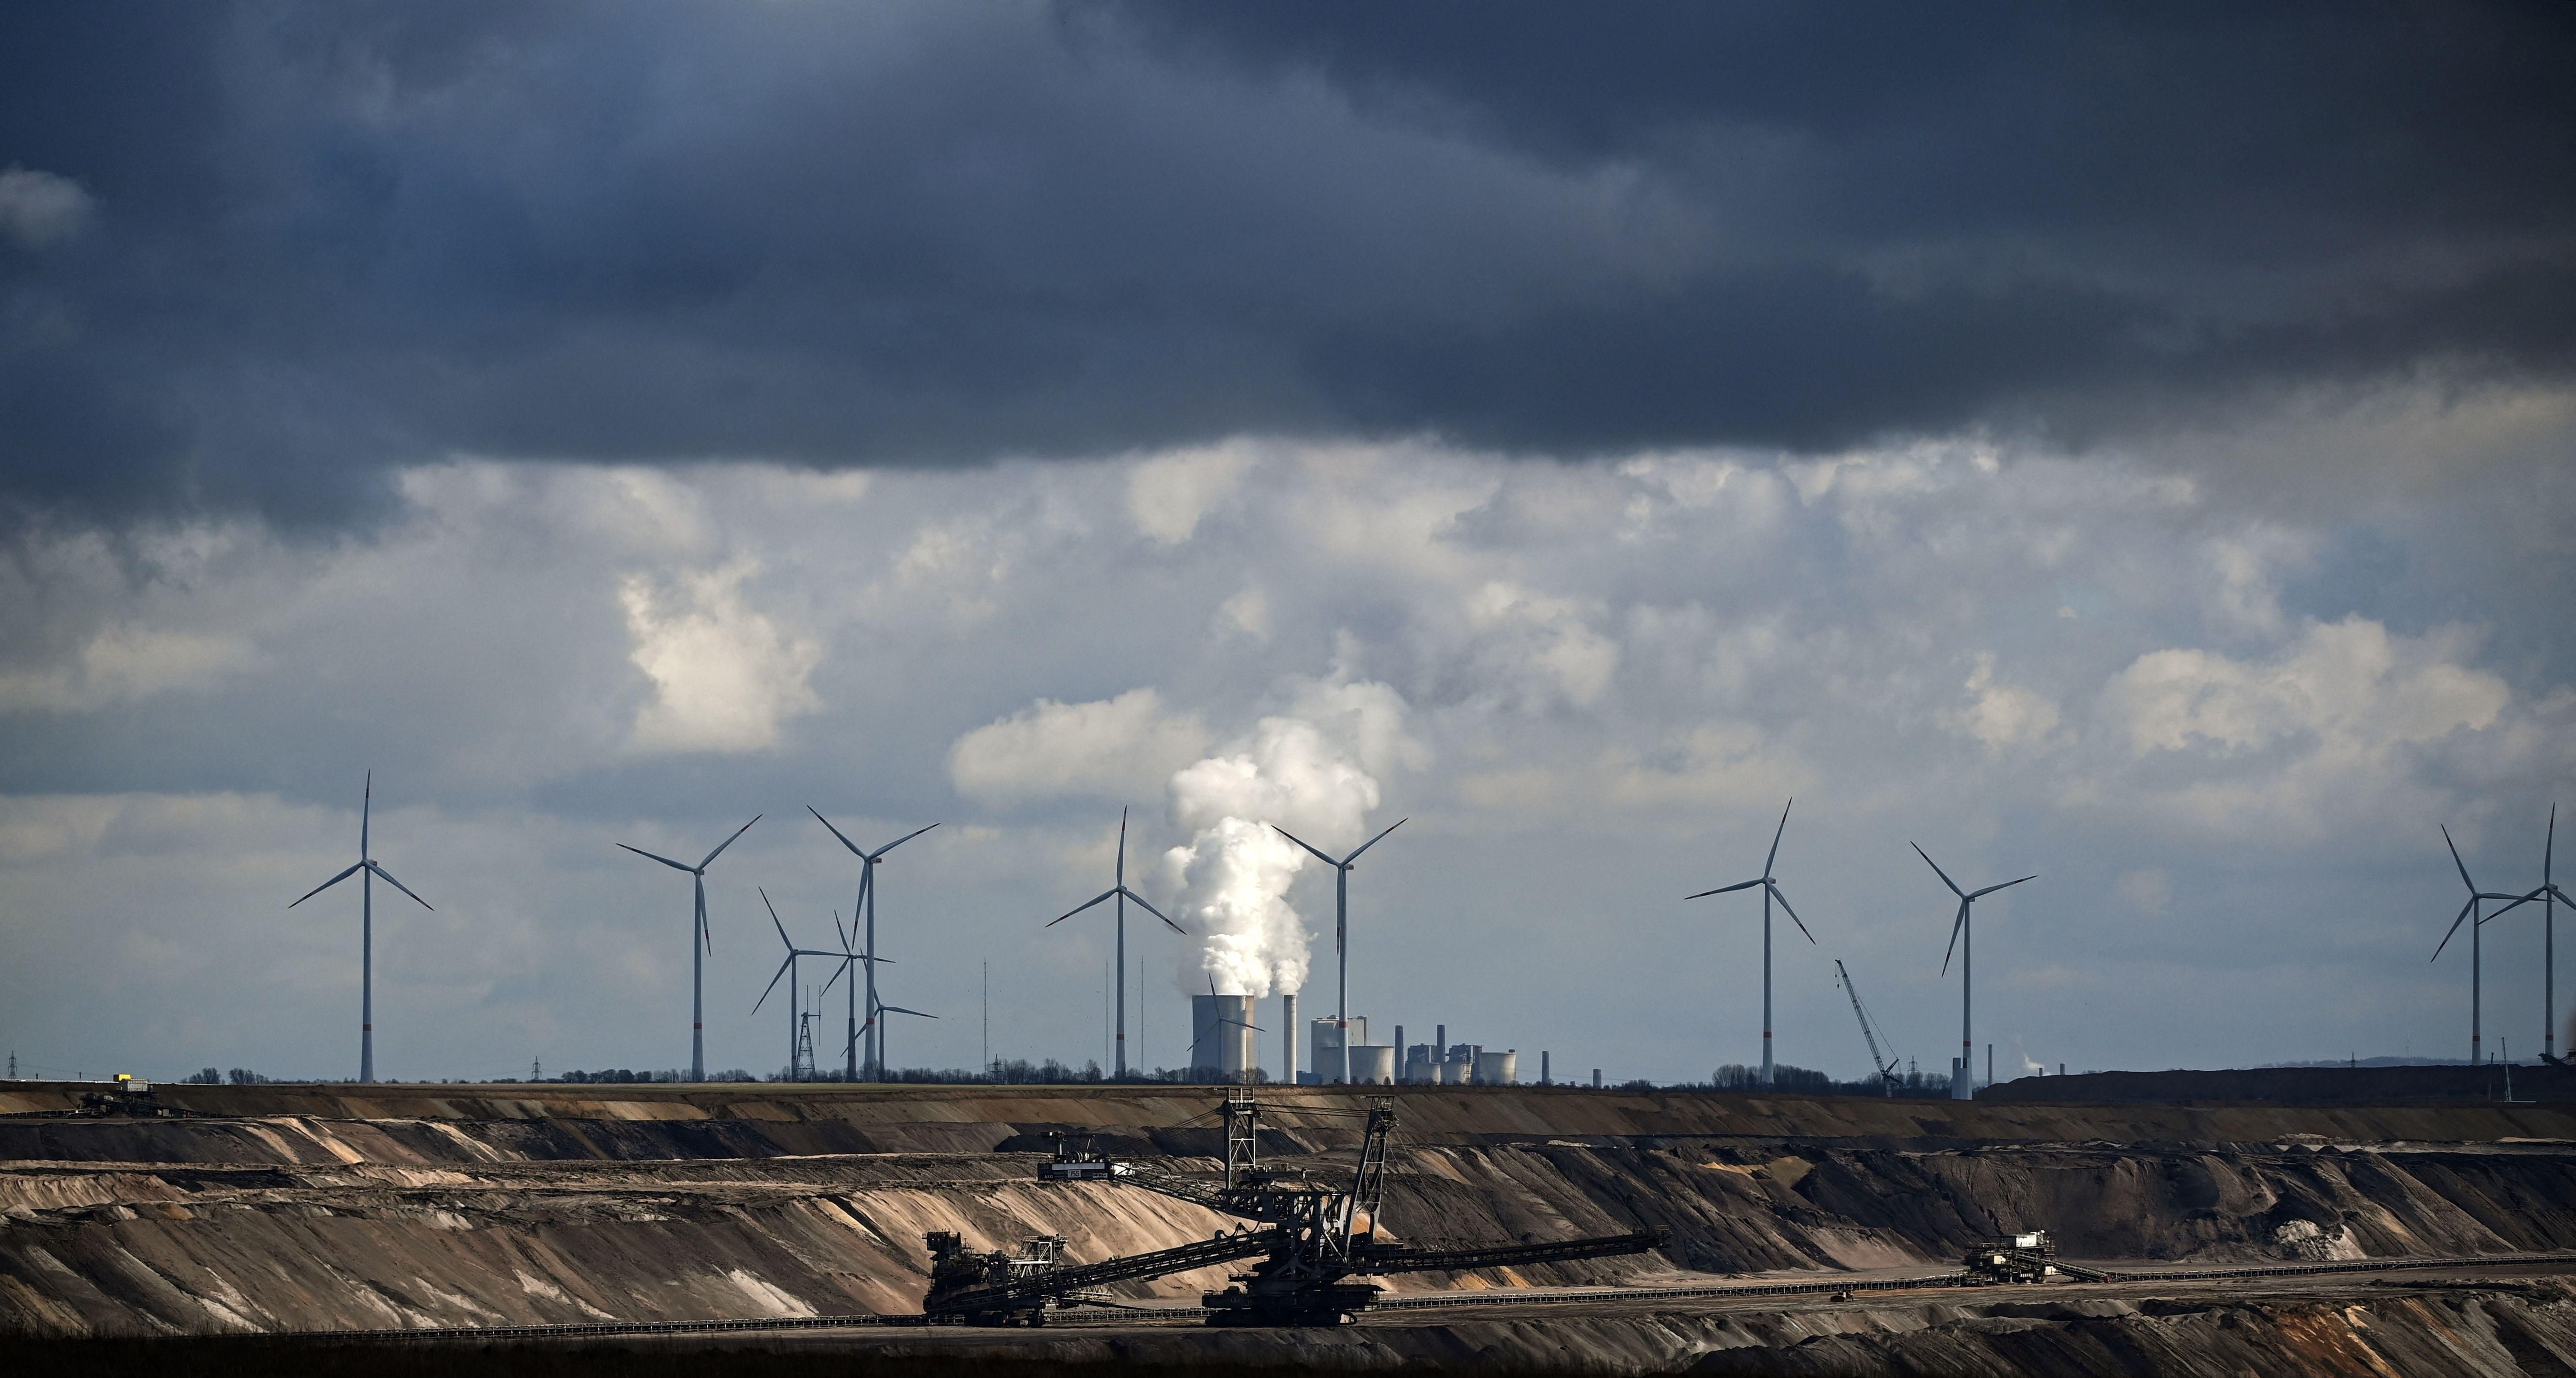 In Garzweiler, Germany, wind turbines are seen near an open-cast mining operation and a coal-fired power plant run by German energy giant RWE on March 15, 2021.